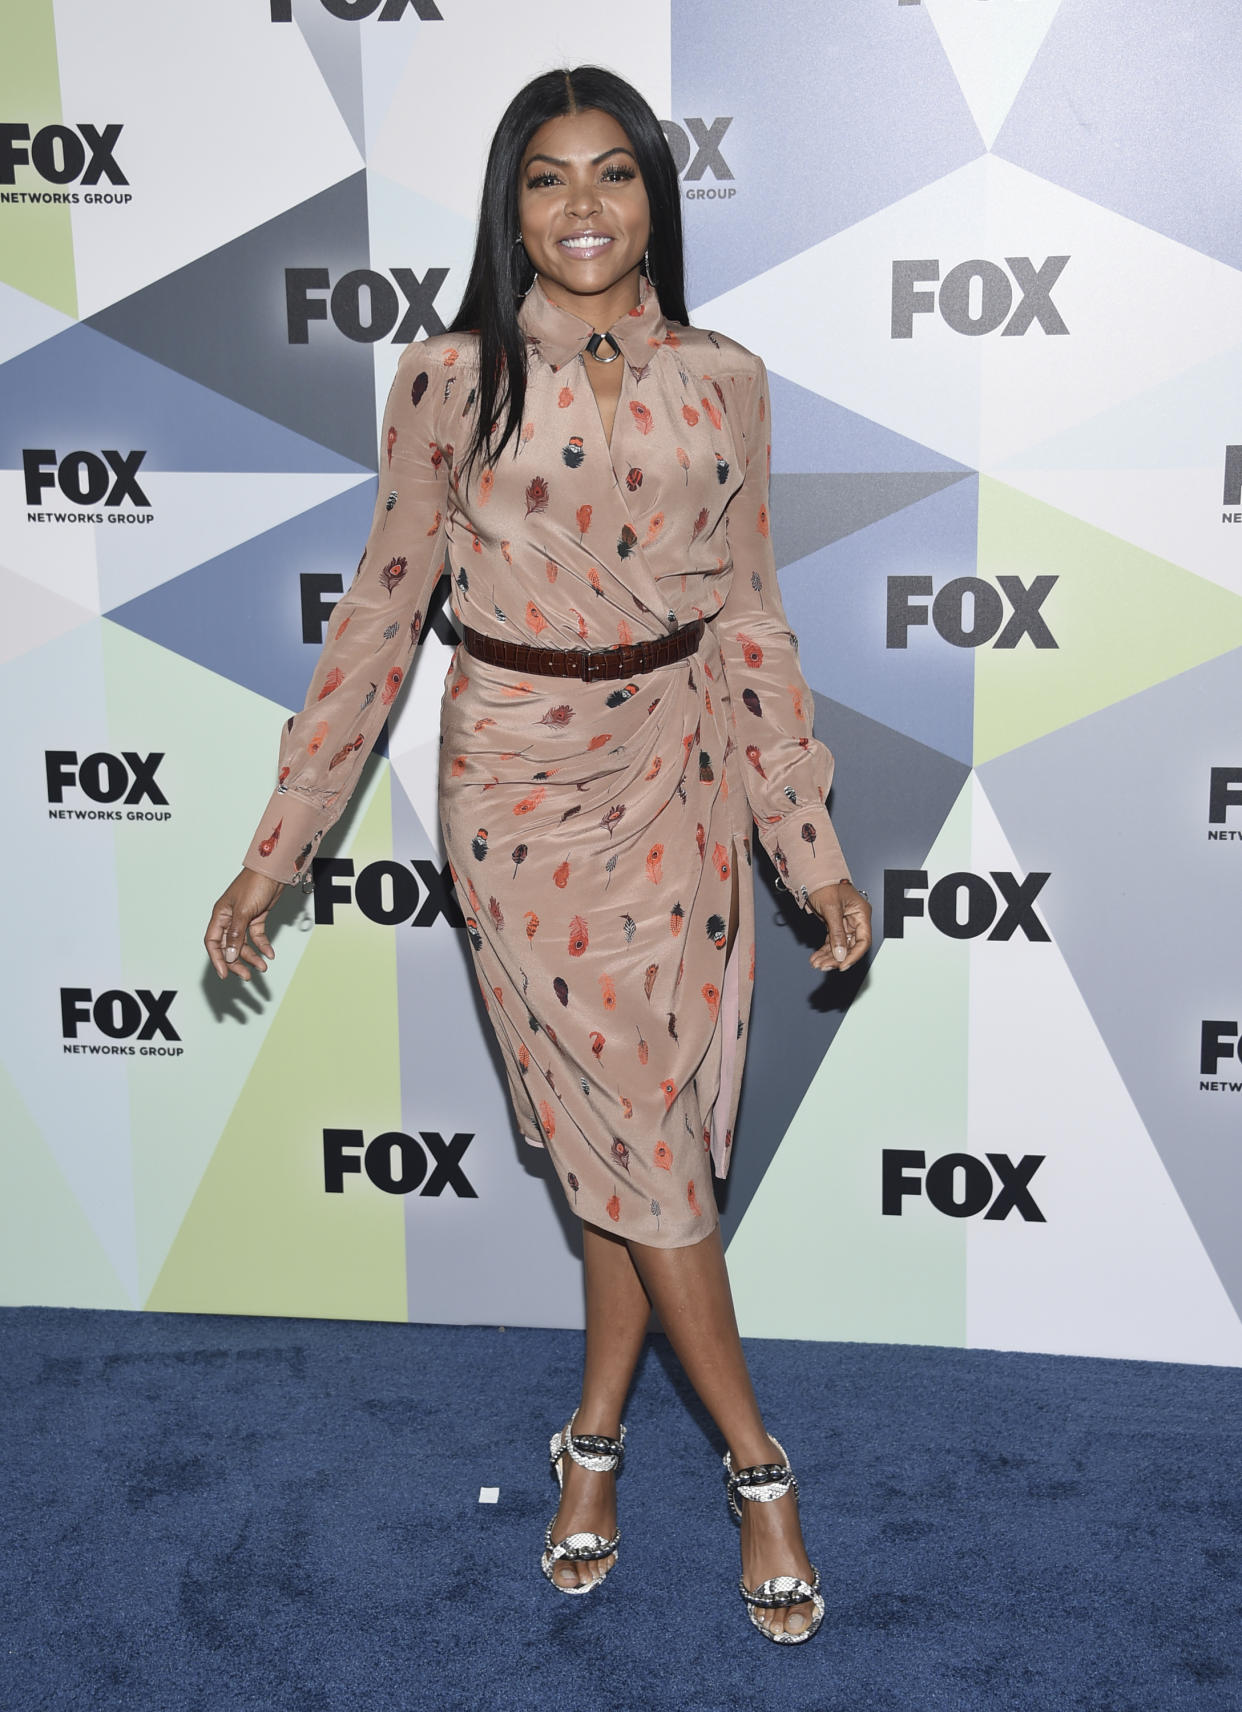 Taraji P. Henson was the first to poke fun at the shocking resmblance on Instagram. (Photo by Evan Agostini/Invision/AP)